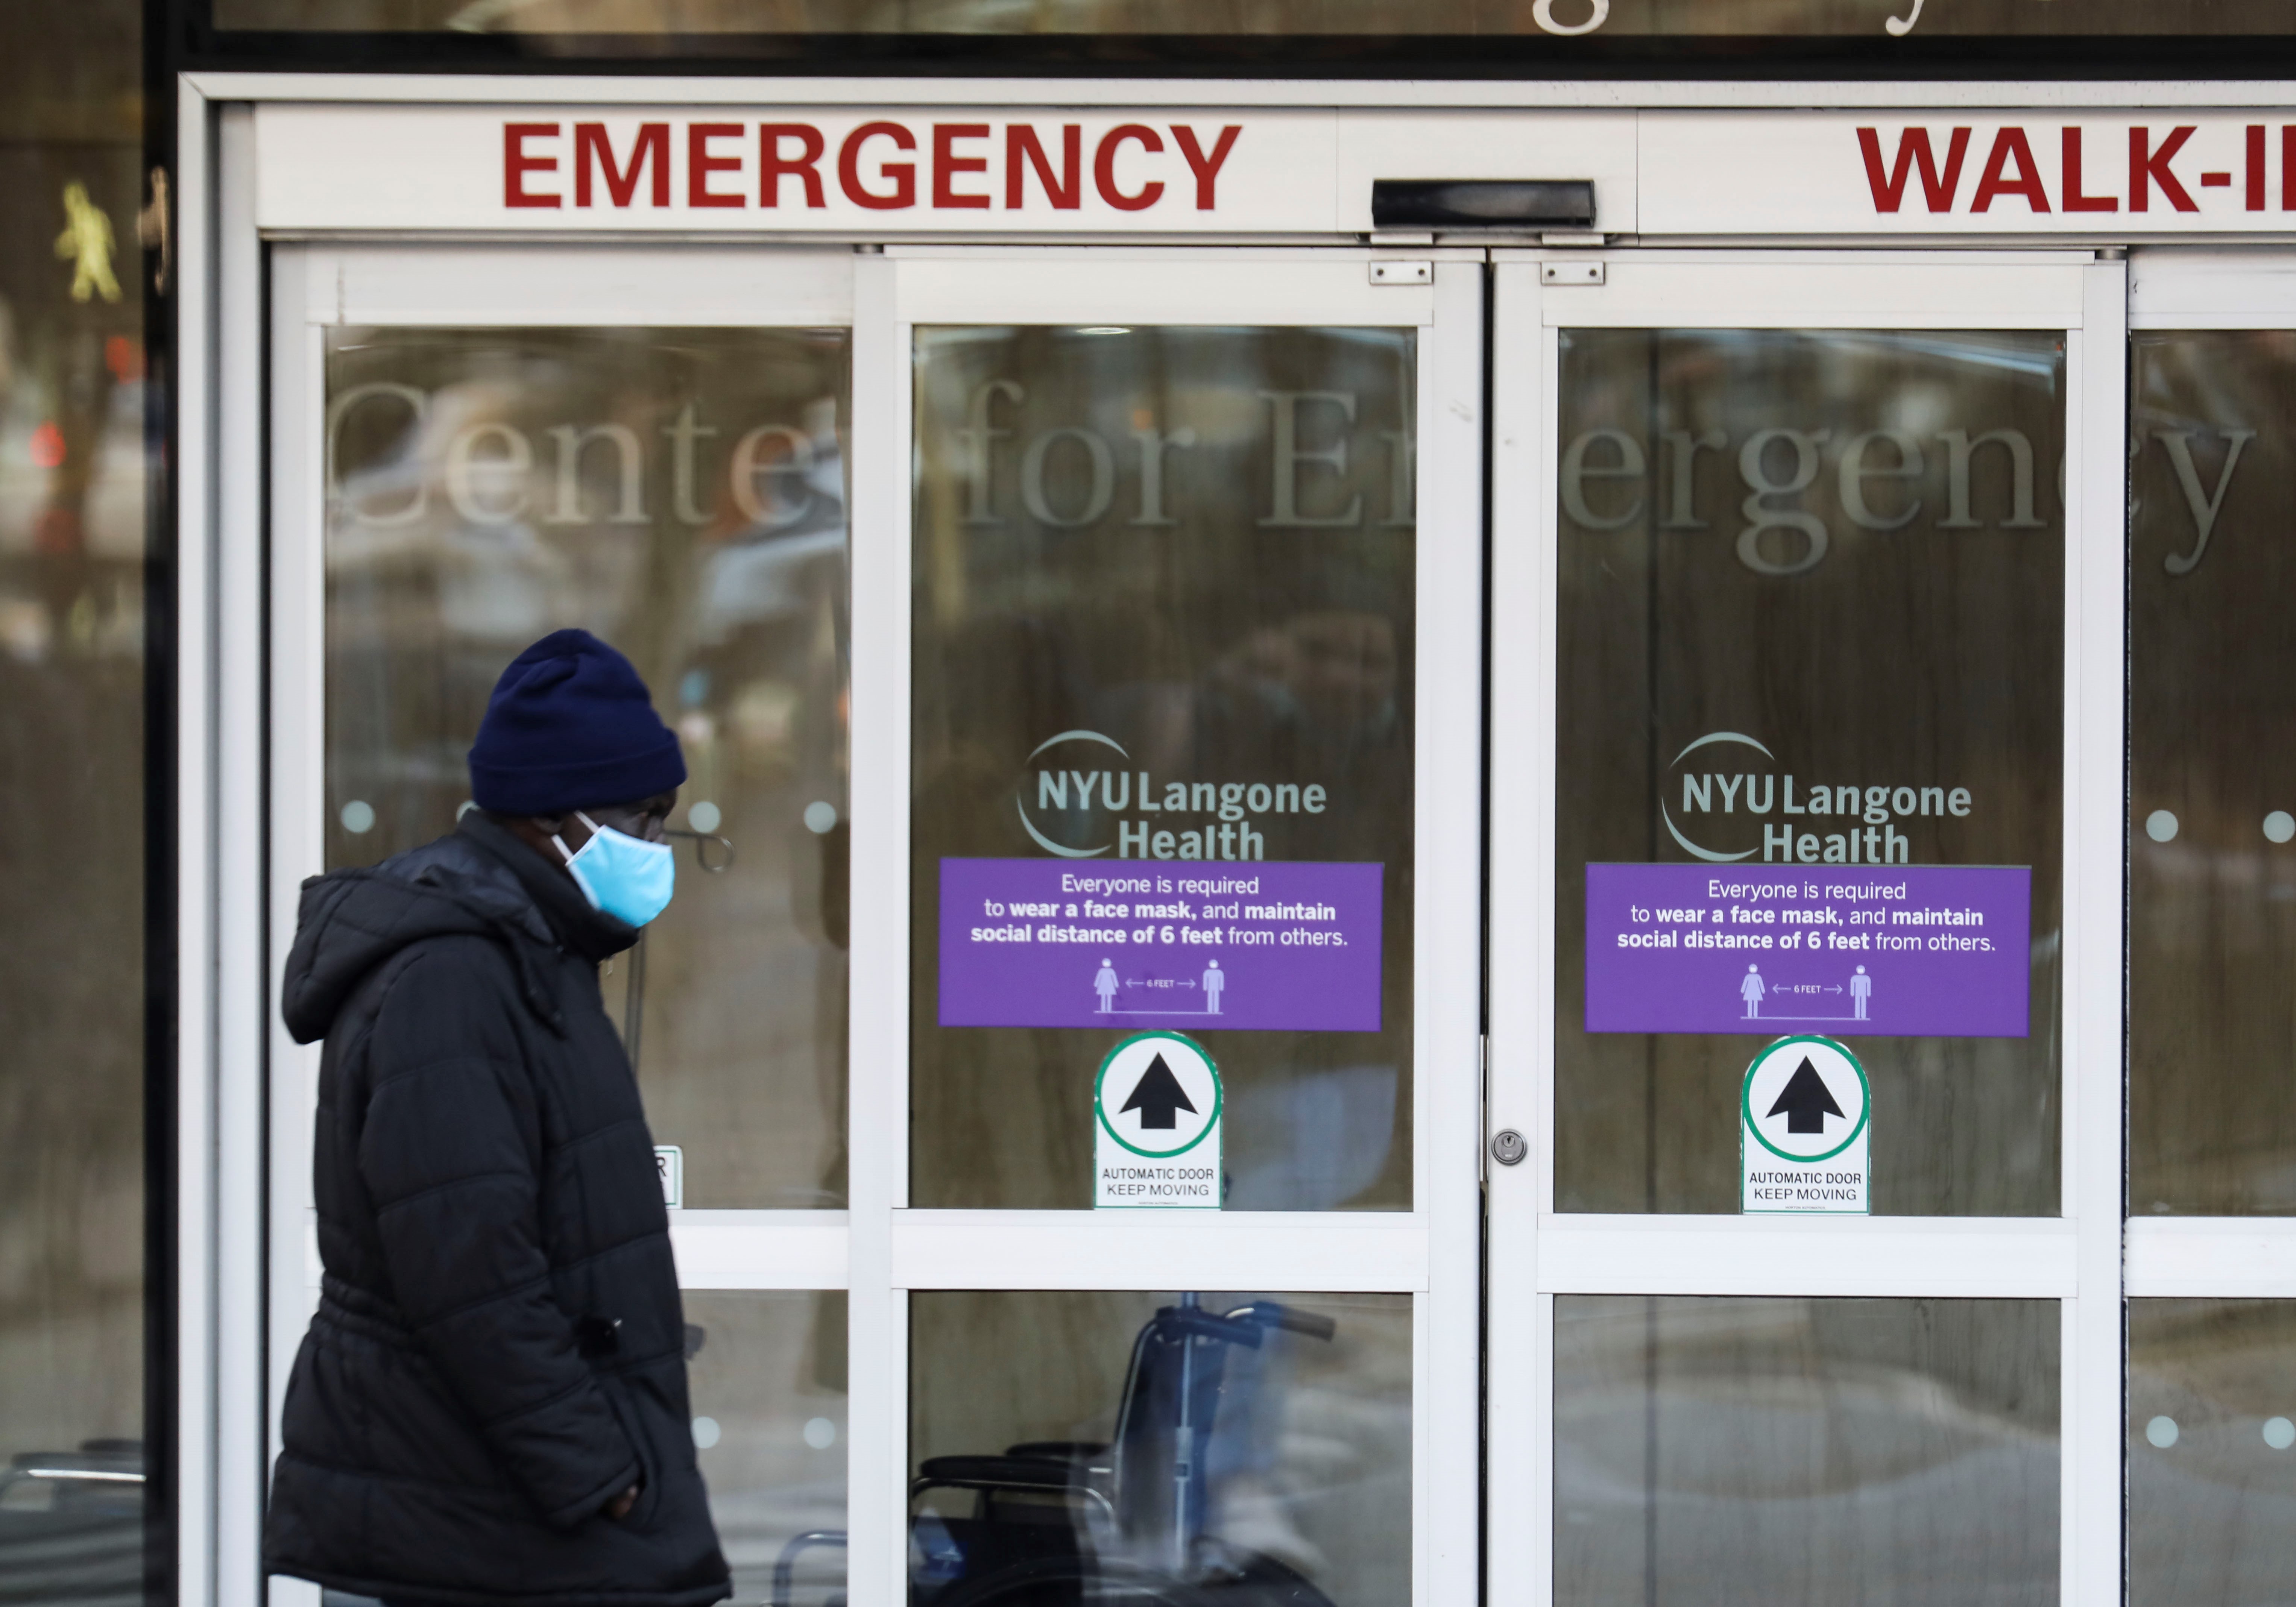 A person in a winter coast and face mask walking past the entrance of a hospital emergency department.